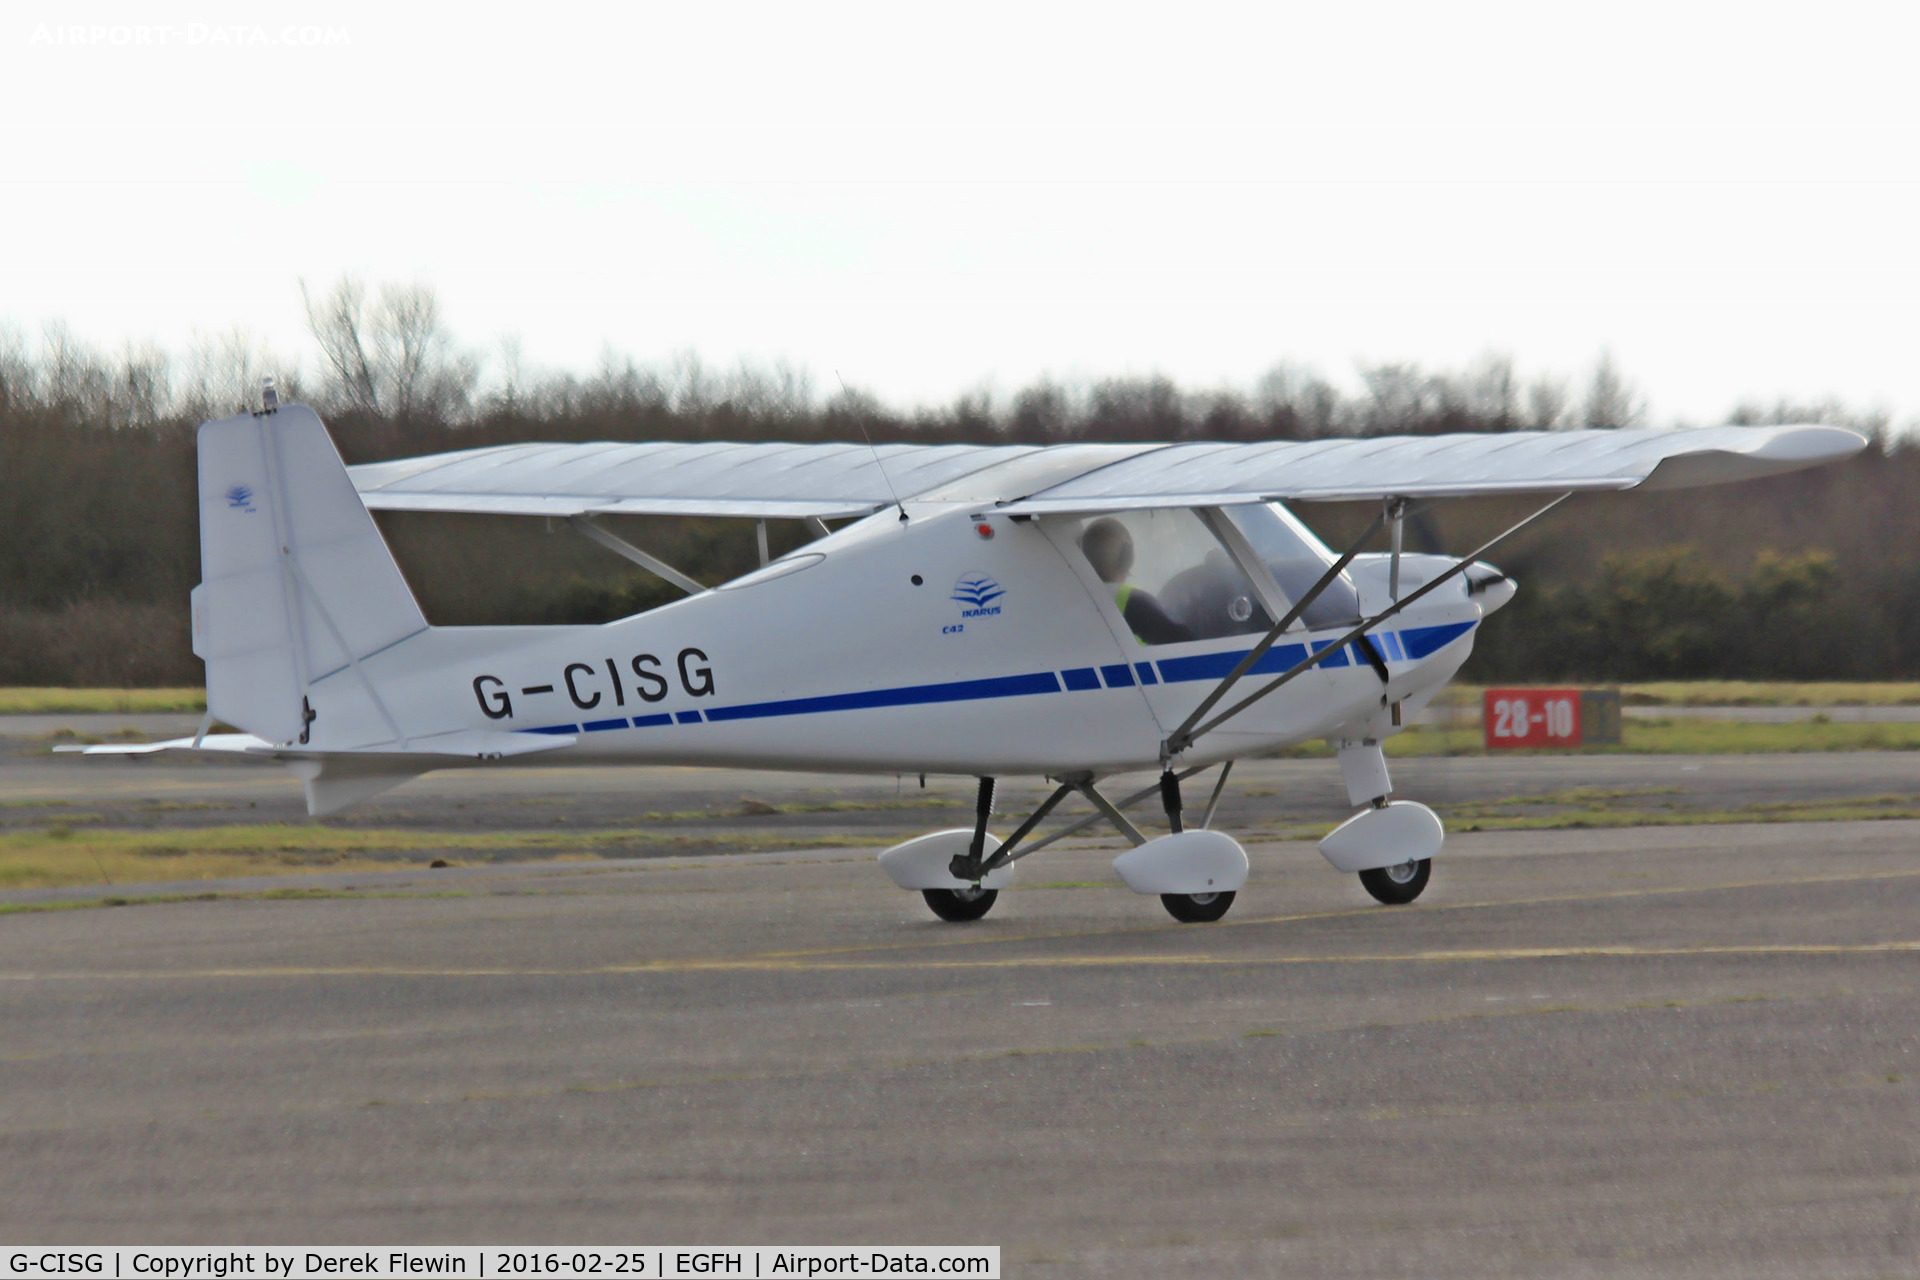 G-CISG, 2015 Comco Ikarus C42 FB80 C/N 1506-7397, Ikarus, Cardiff based, seen taxxing out.